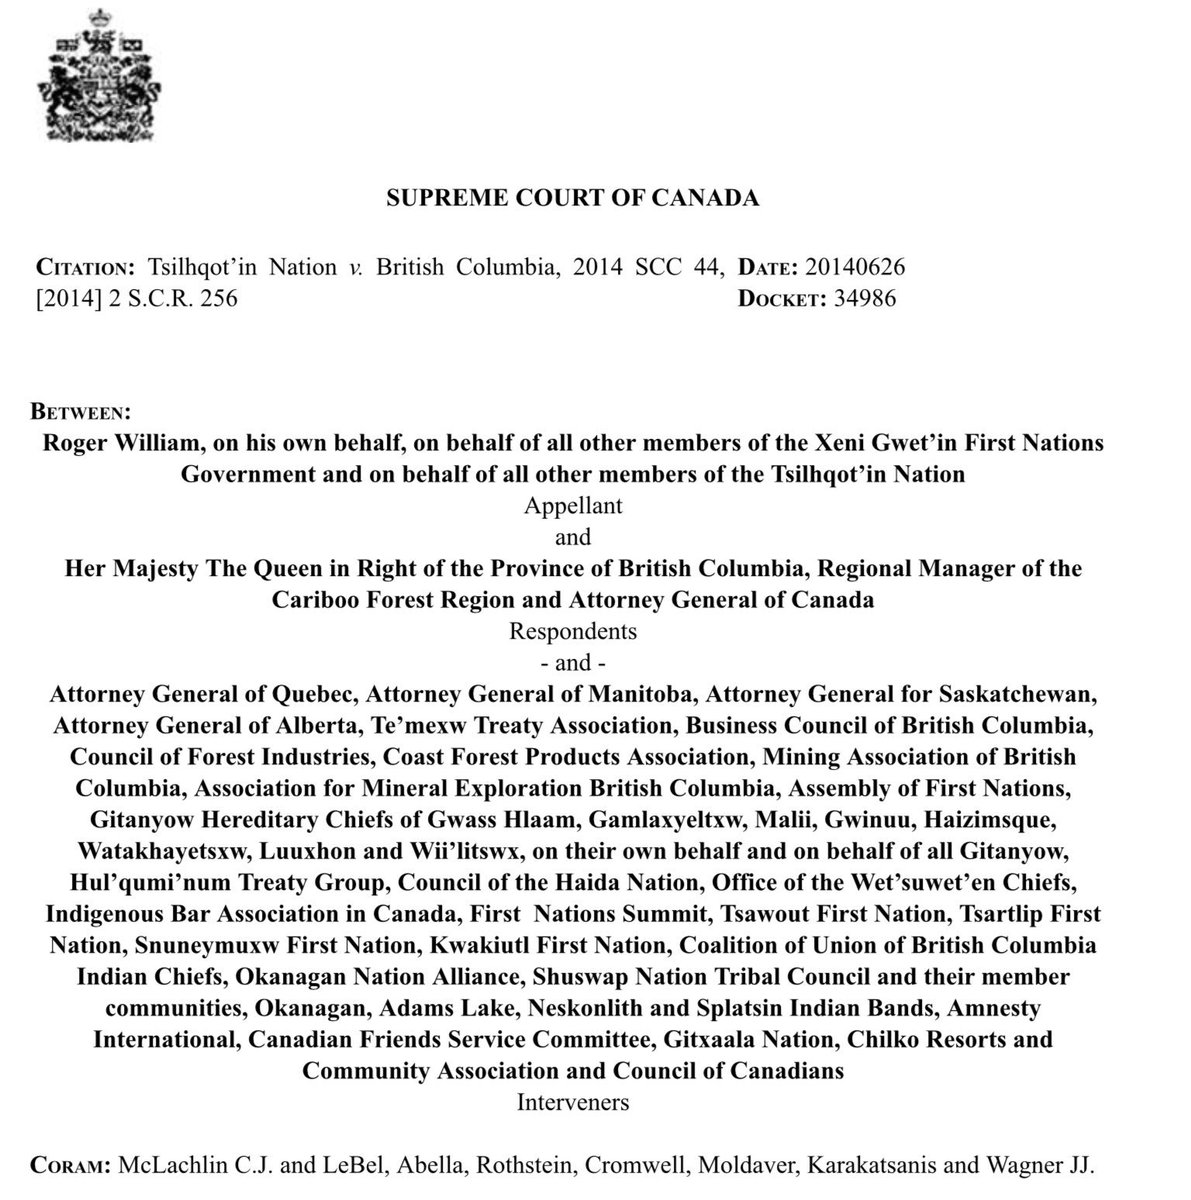 But quite a lot more important than my opinion, informed tho it may be?The Supreme Court of Canada’s opinionThe jurists who heard Tsilhqot’in Nation v British Columbia (2014 SCC 44) found that the doctrine of terra nullius NEVER APPLIED IN CANADA. 5/